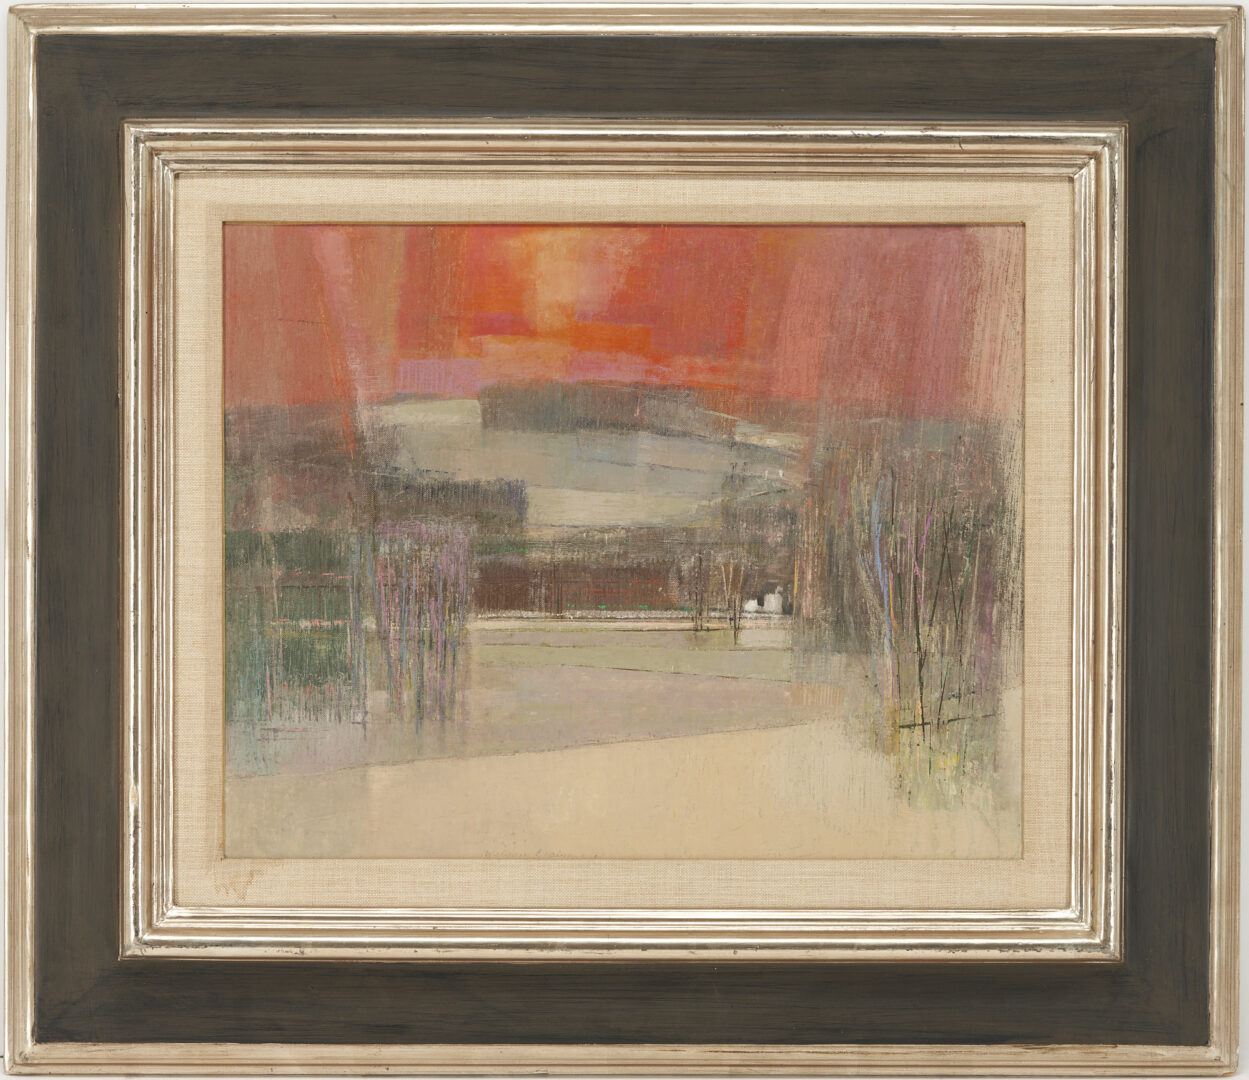 Lot 487: William Palmer Oil on Canvasboard, "Moods of Winter, Sunset"